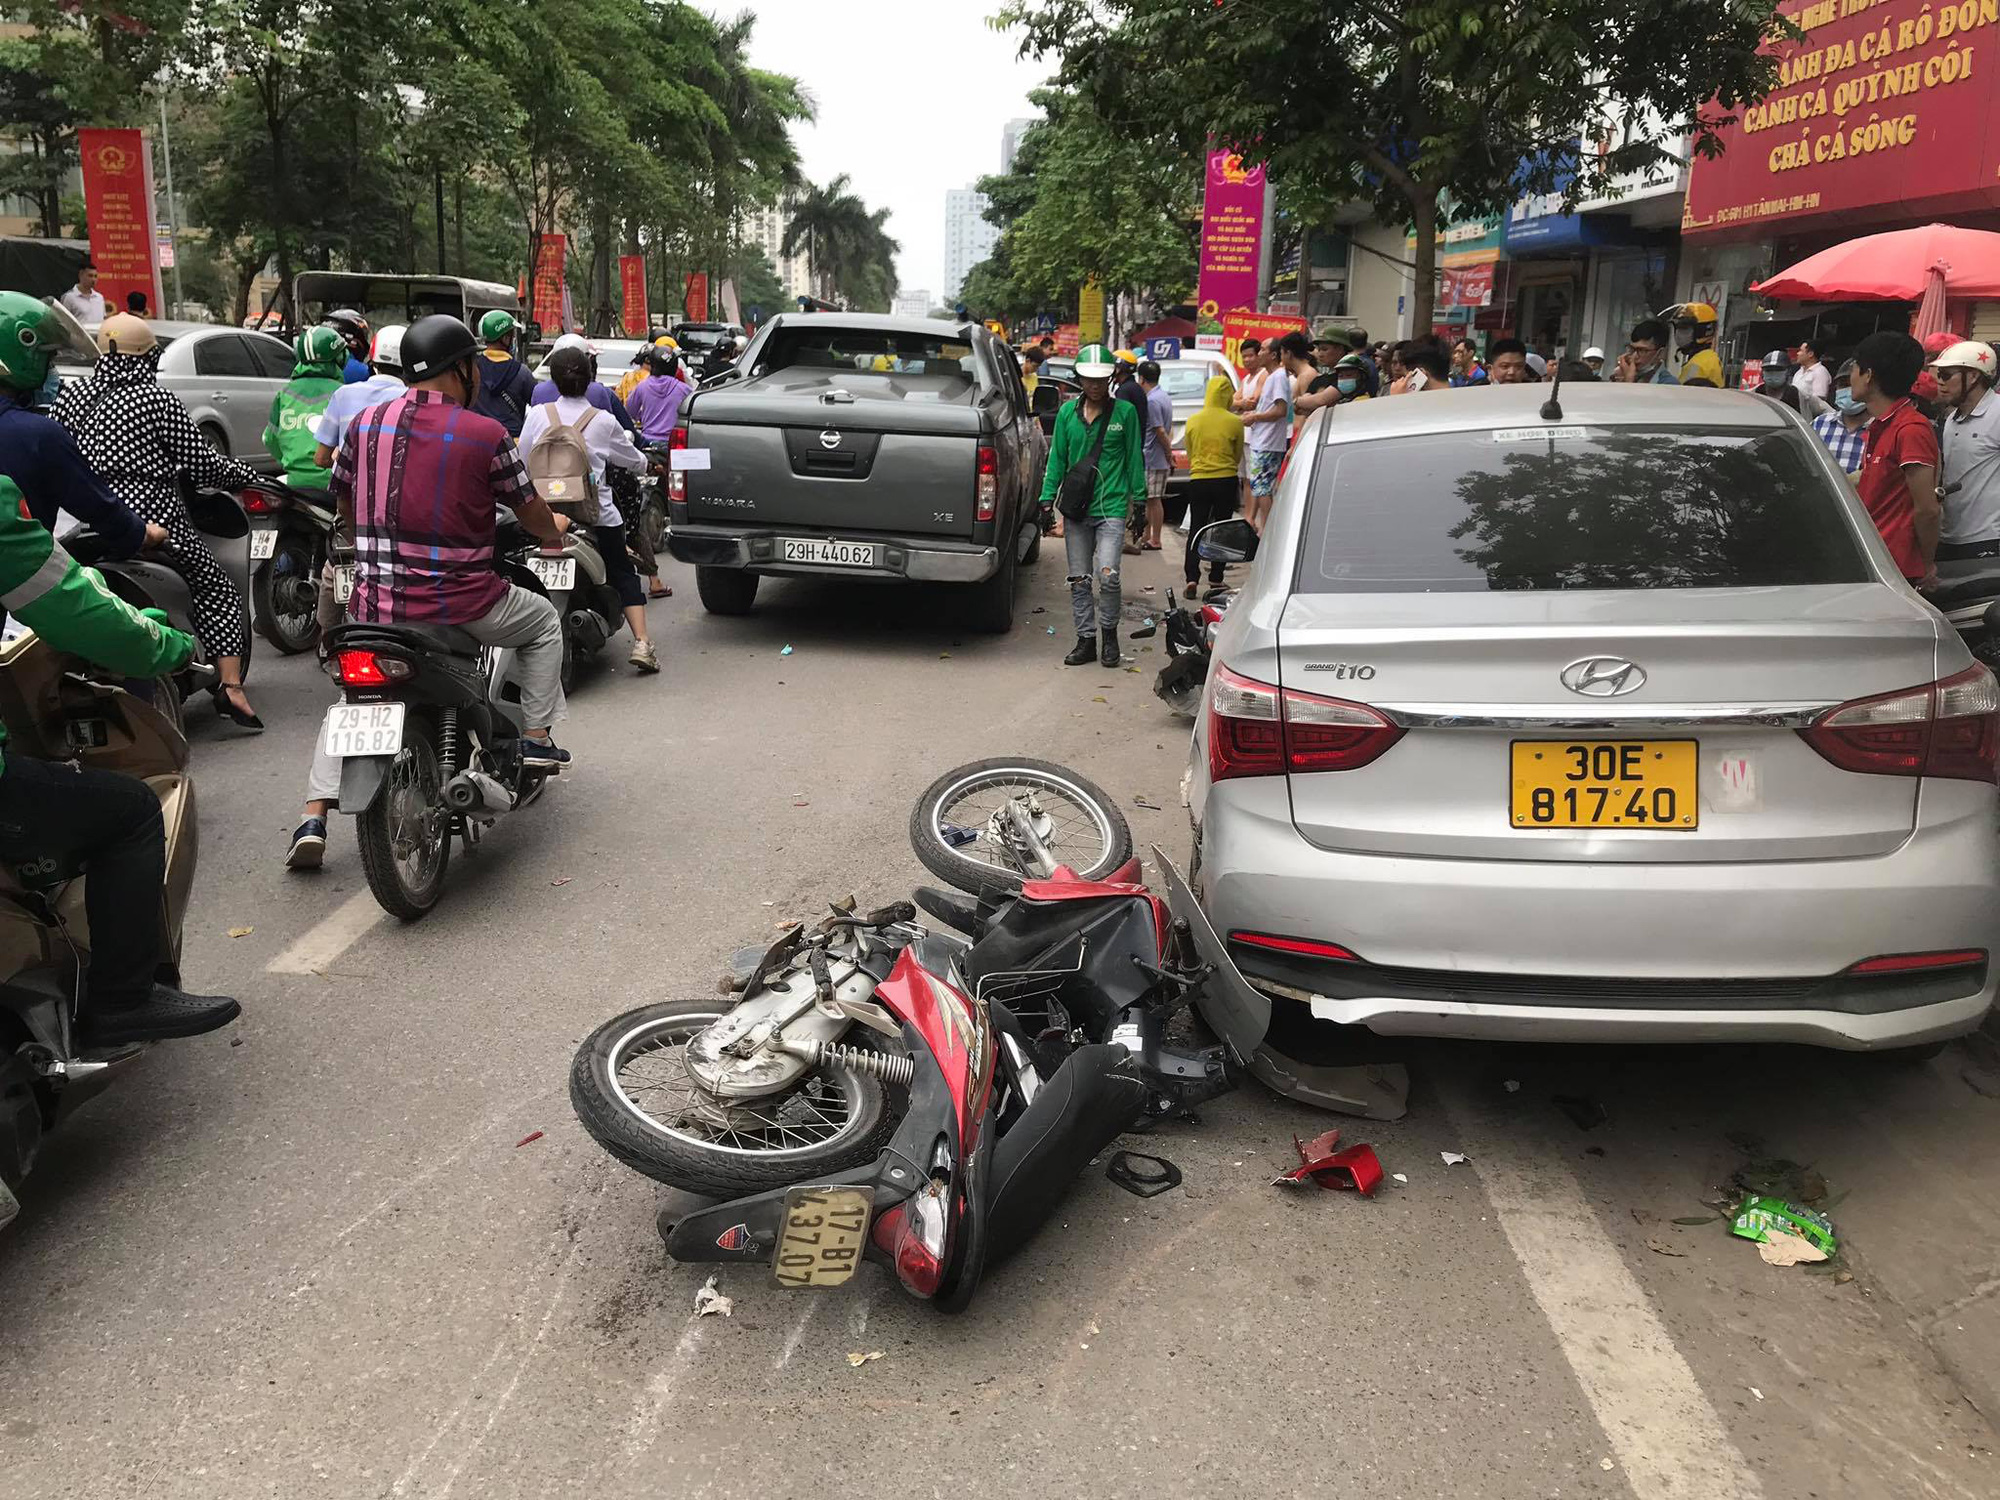 The site of a road crash involving a pickup truck, three cars, and two motorbikes in Hanoi, April 24, 2021. Photo: Trung Khanh / Tuoi Tre